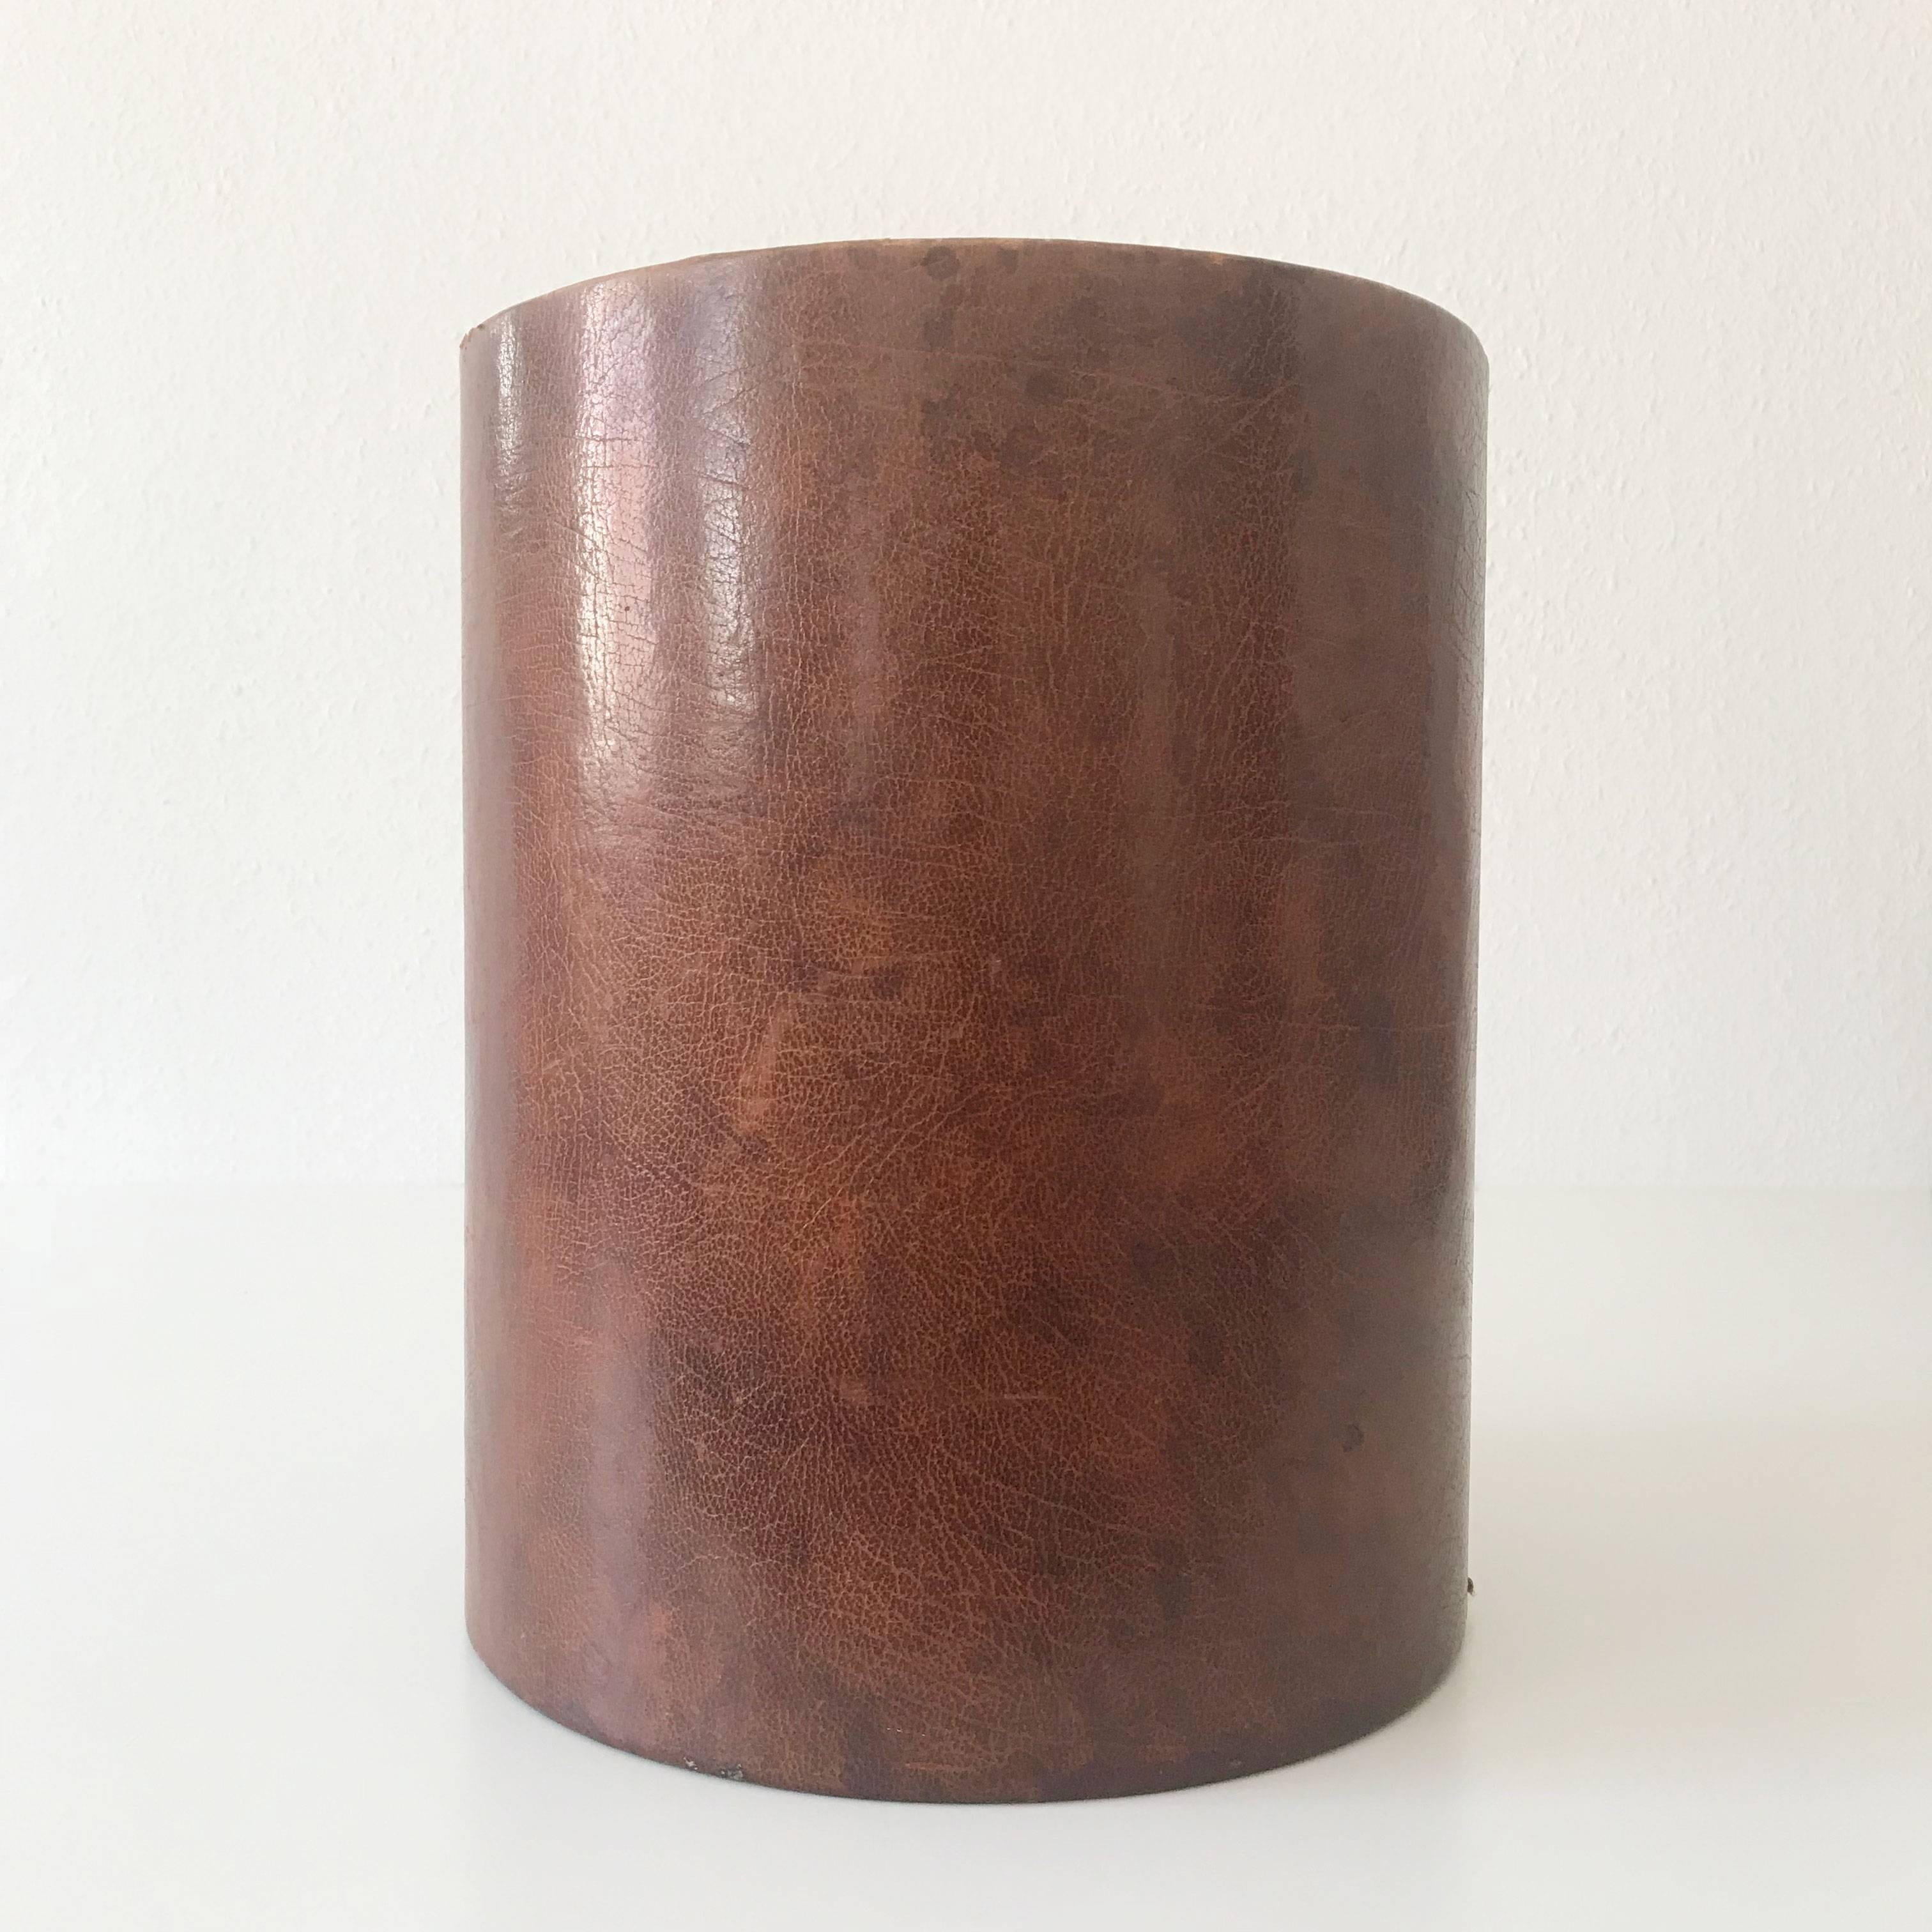 Elegant Mid-Century Modern waste paper basket in the style of Carl Auböck.
It is executed in dark brown leather and has a nice patina.

Wear consistent with use and age. Water mark on one side (please look at the images).